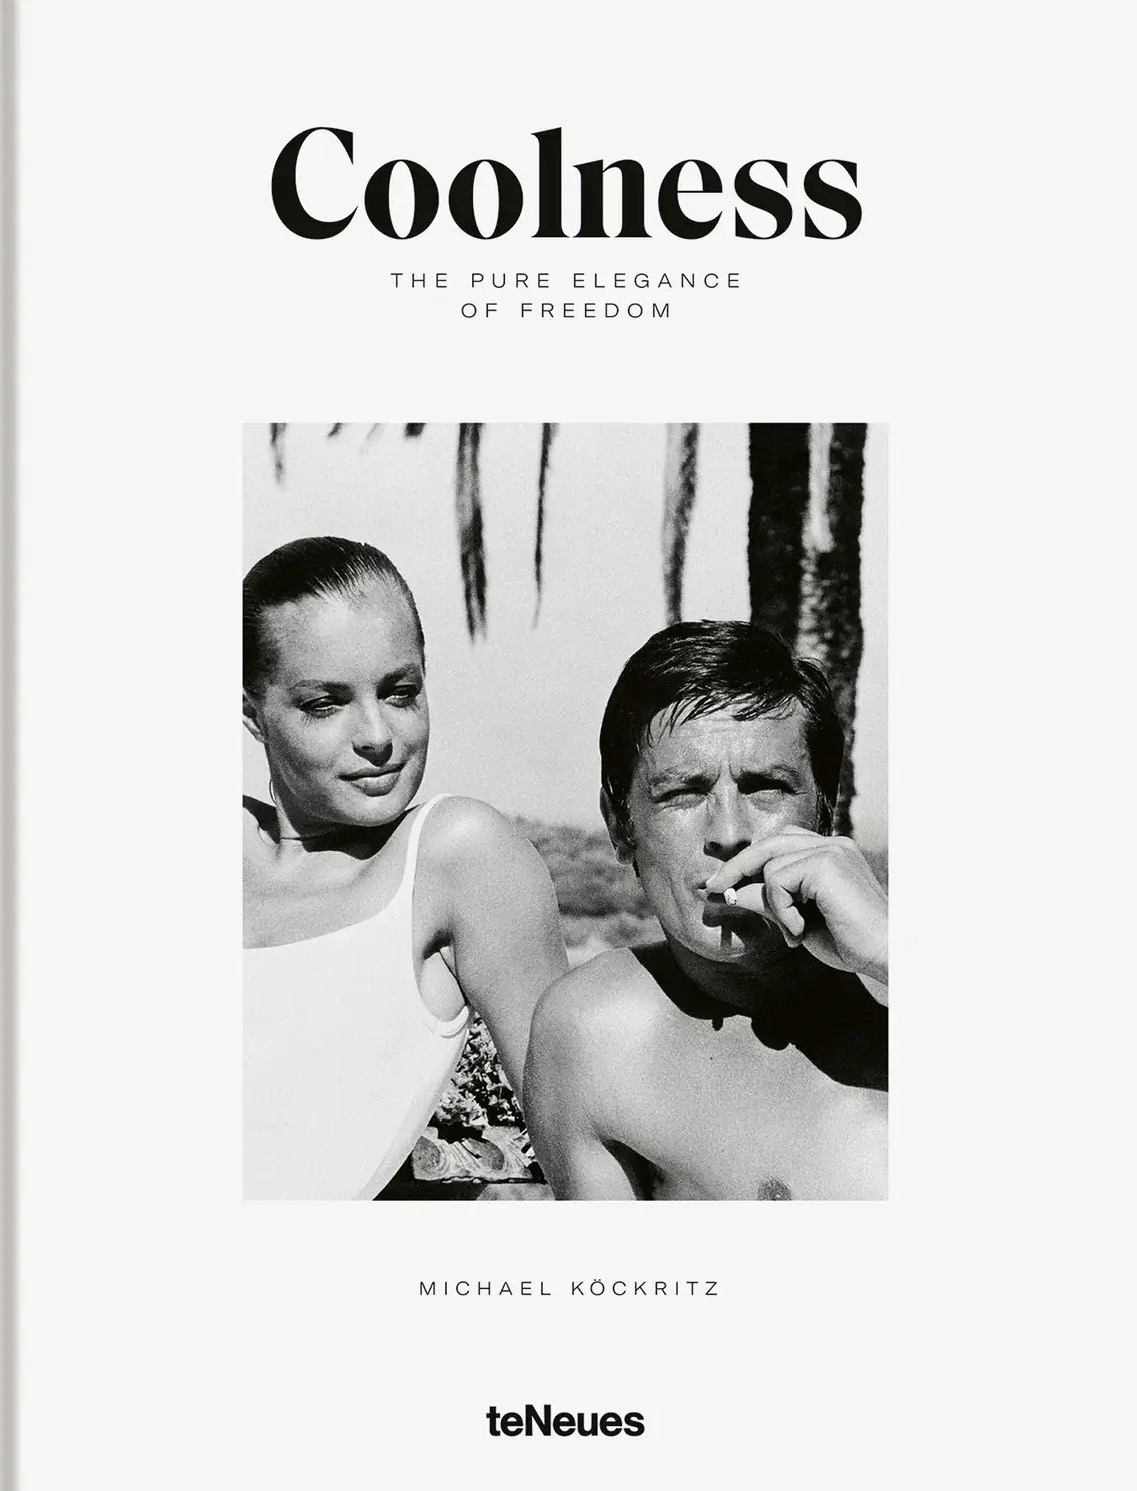 Coolness – The Pure Elegance of Freedom